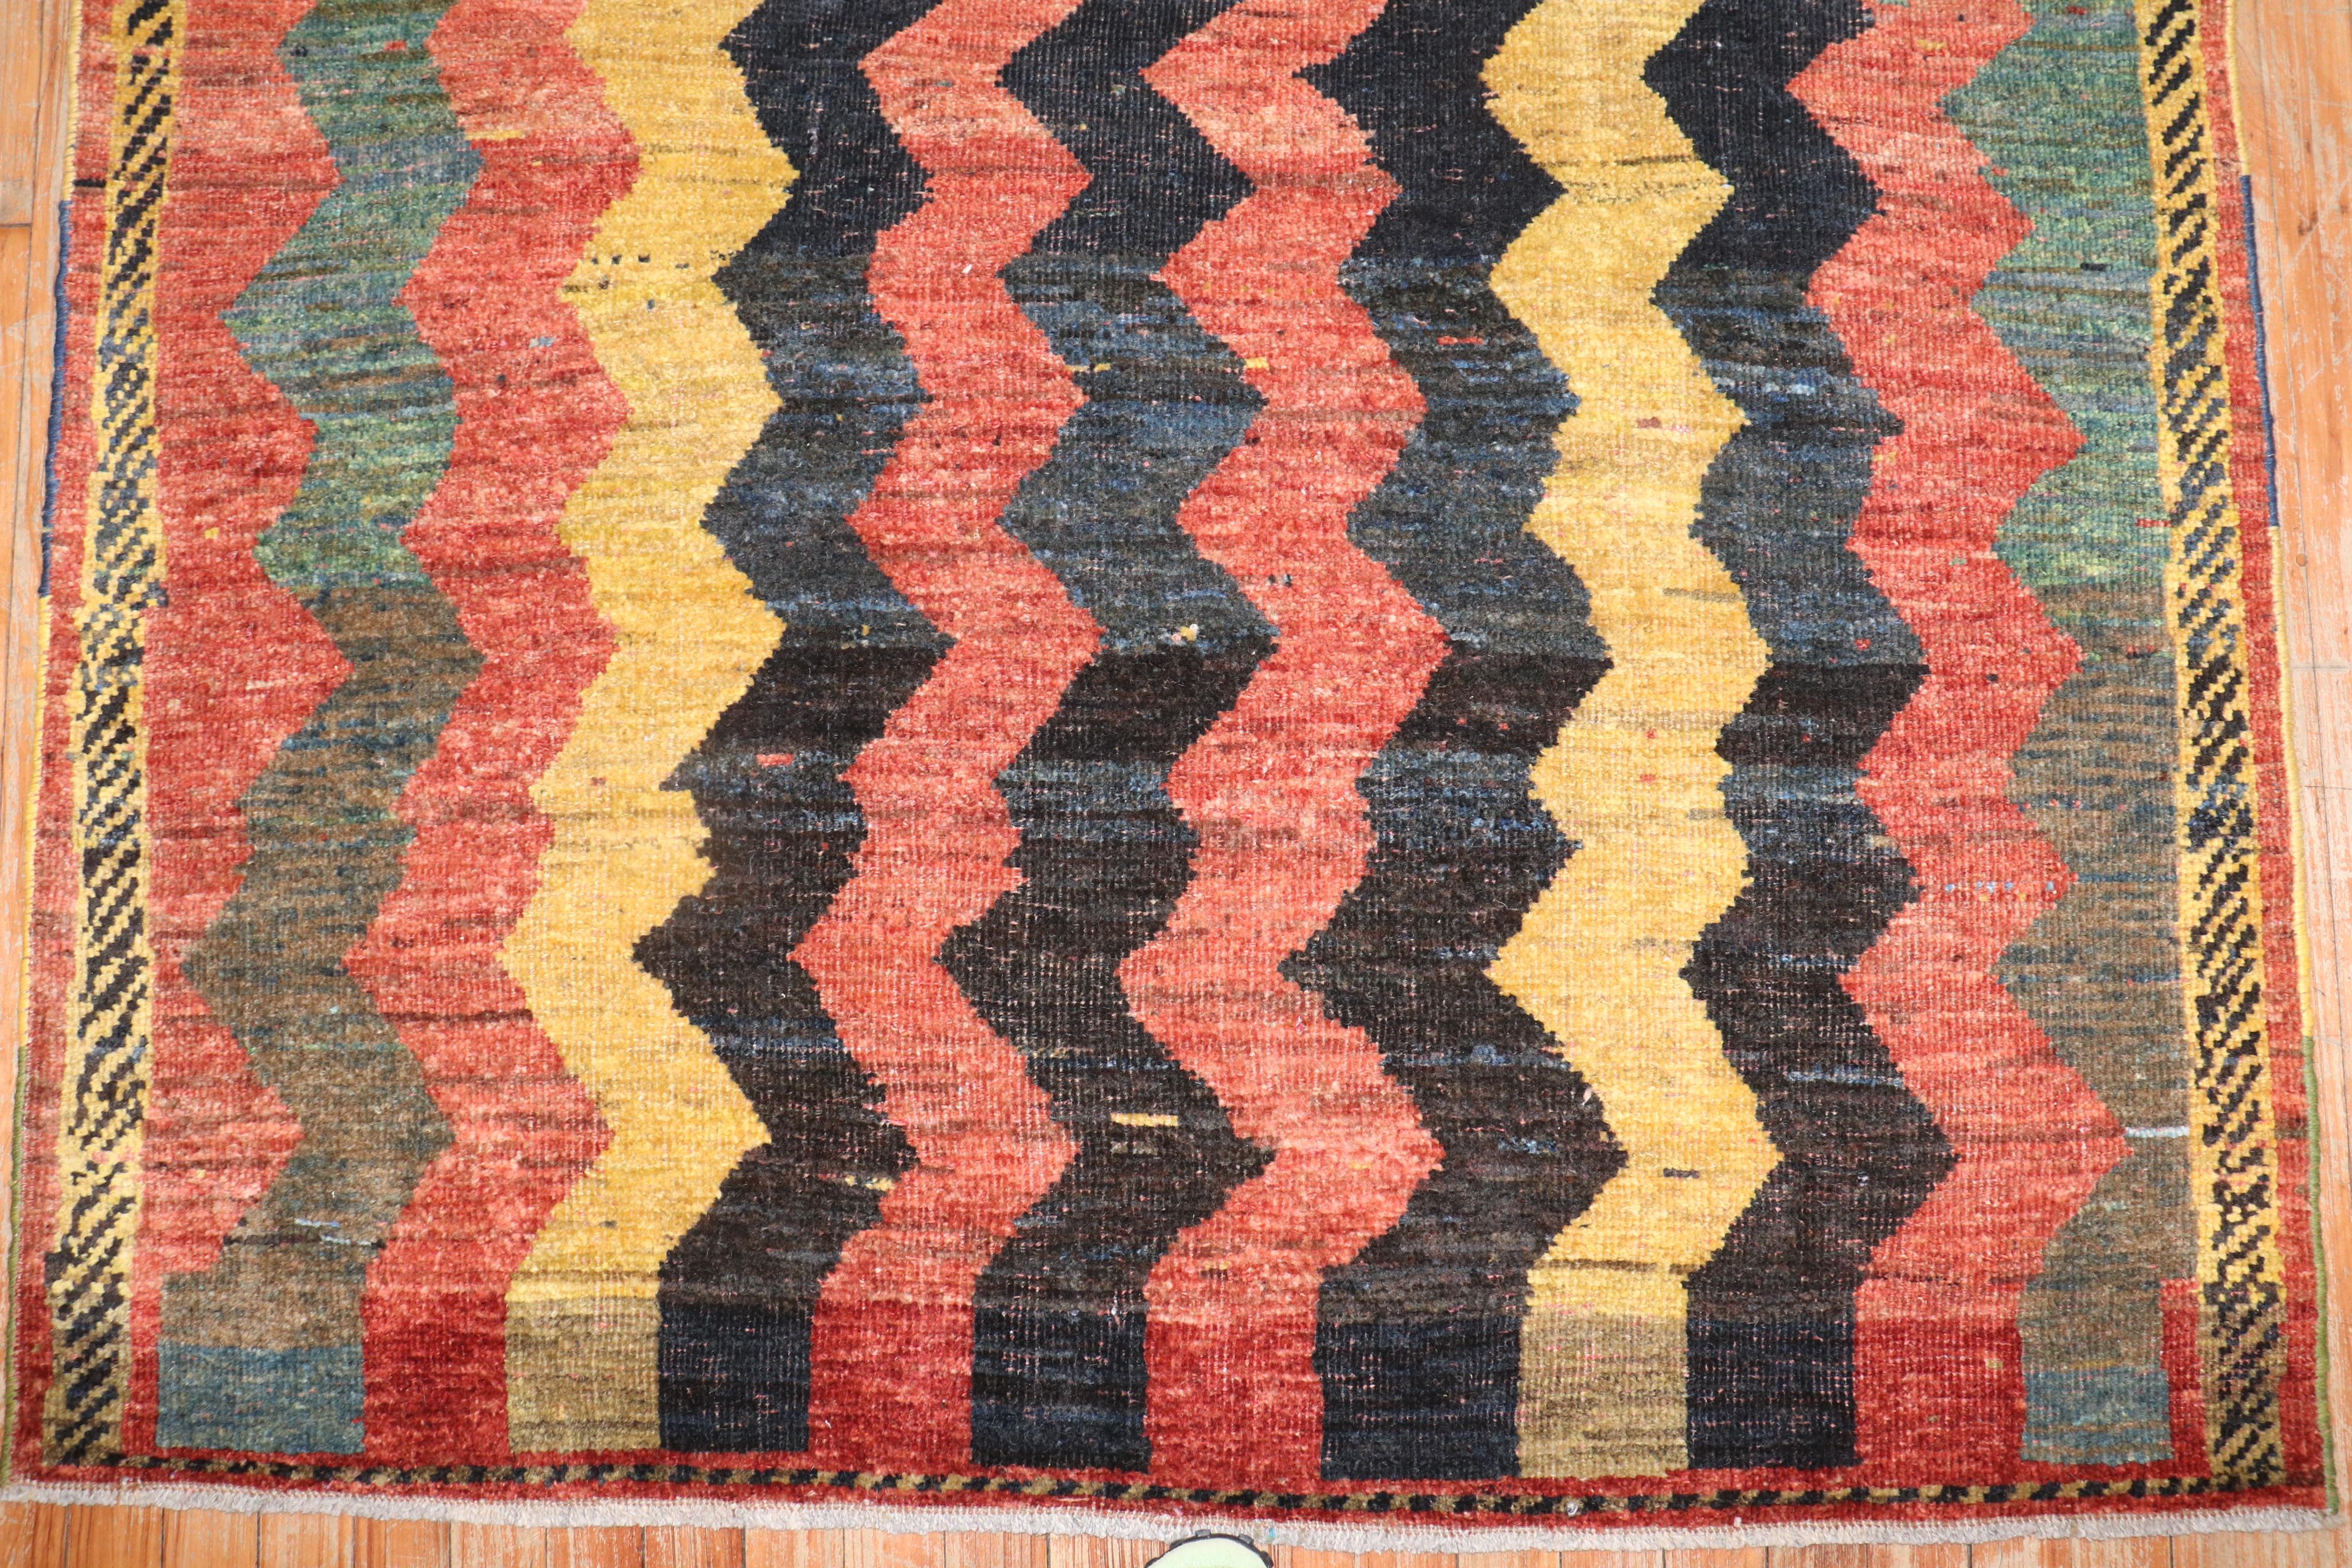 A 3rd quarter of the 20th Century Persian Gabbeh rug with a wavy zig-zag design

size 3' 5